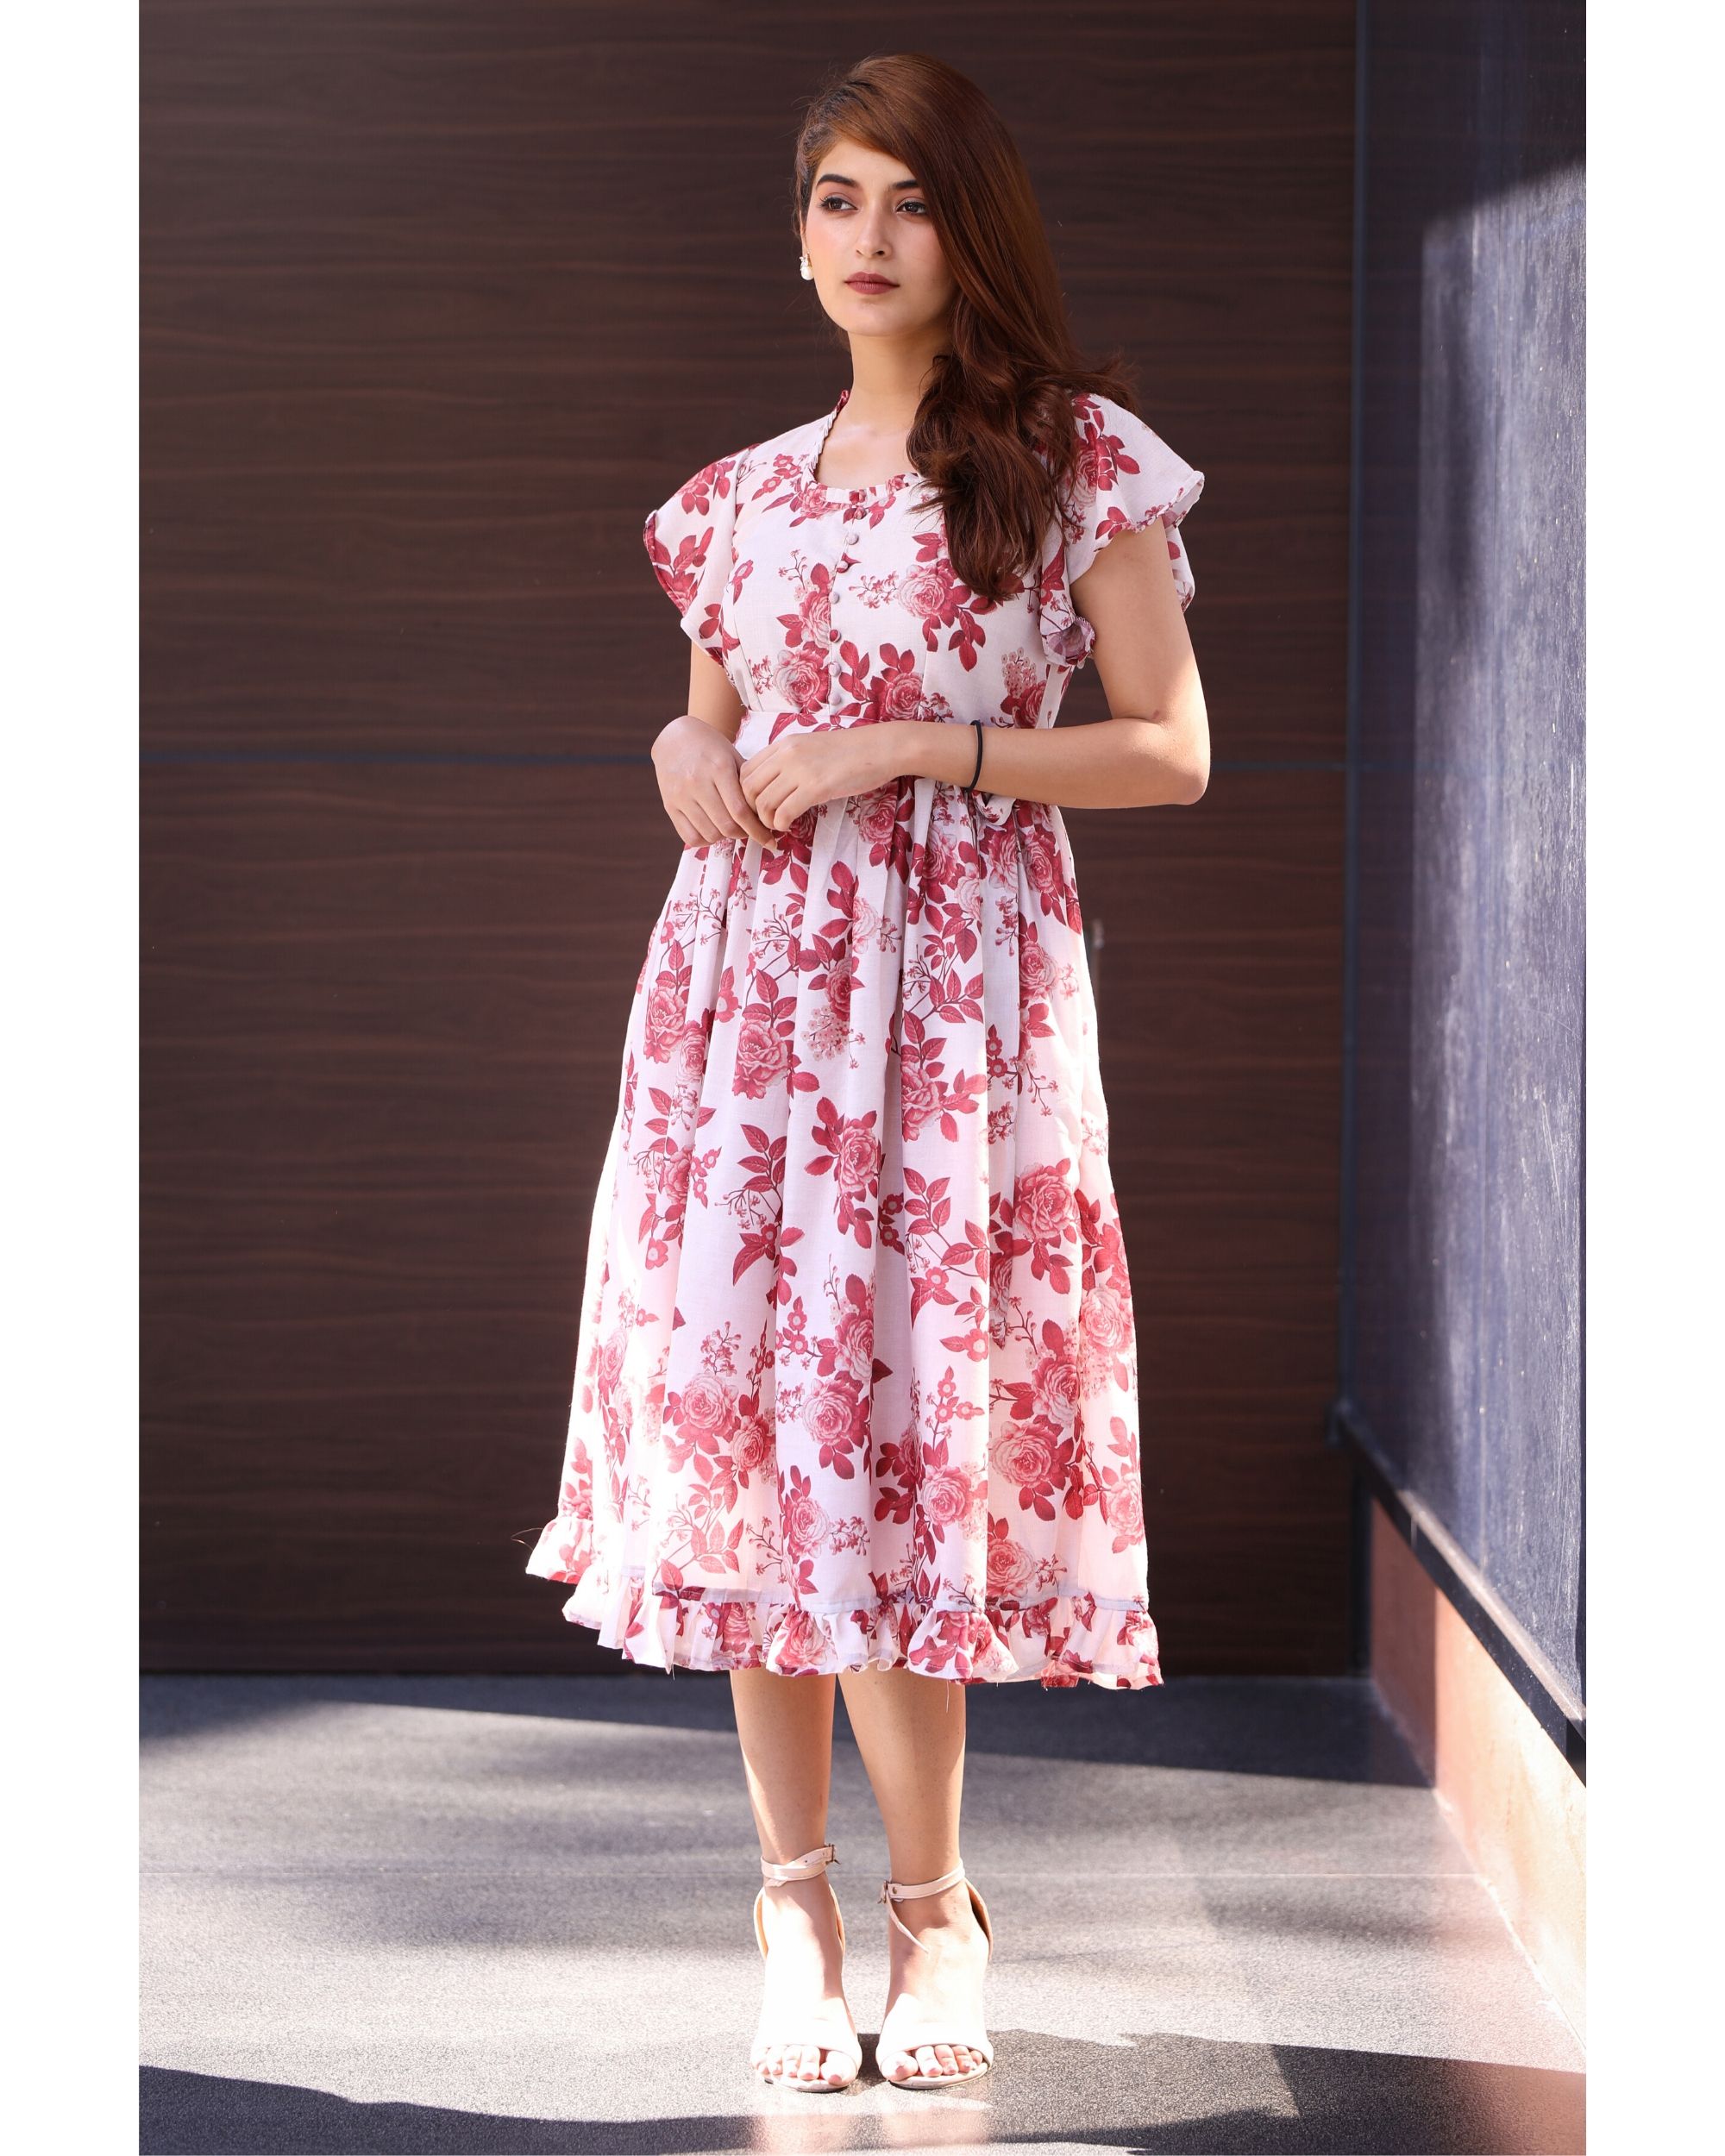 Pink and white floral midi dress by The ...